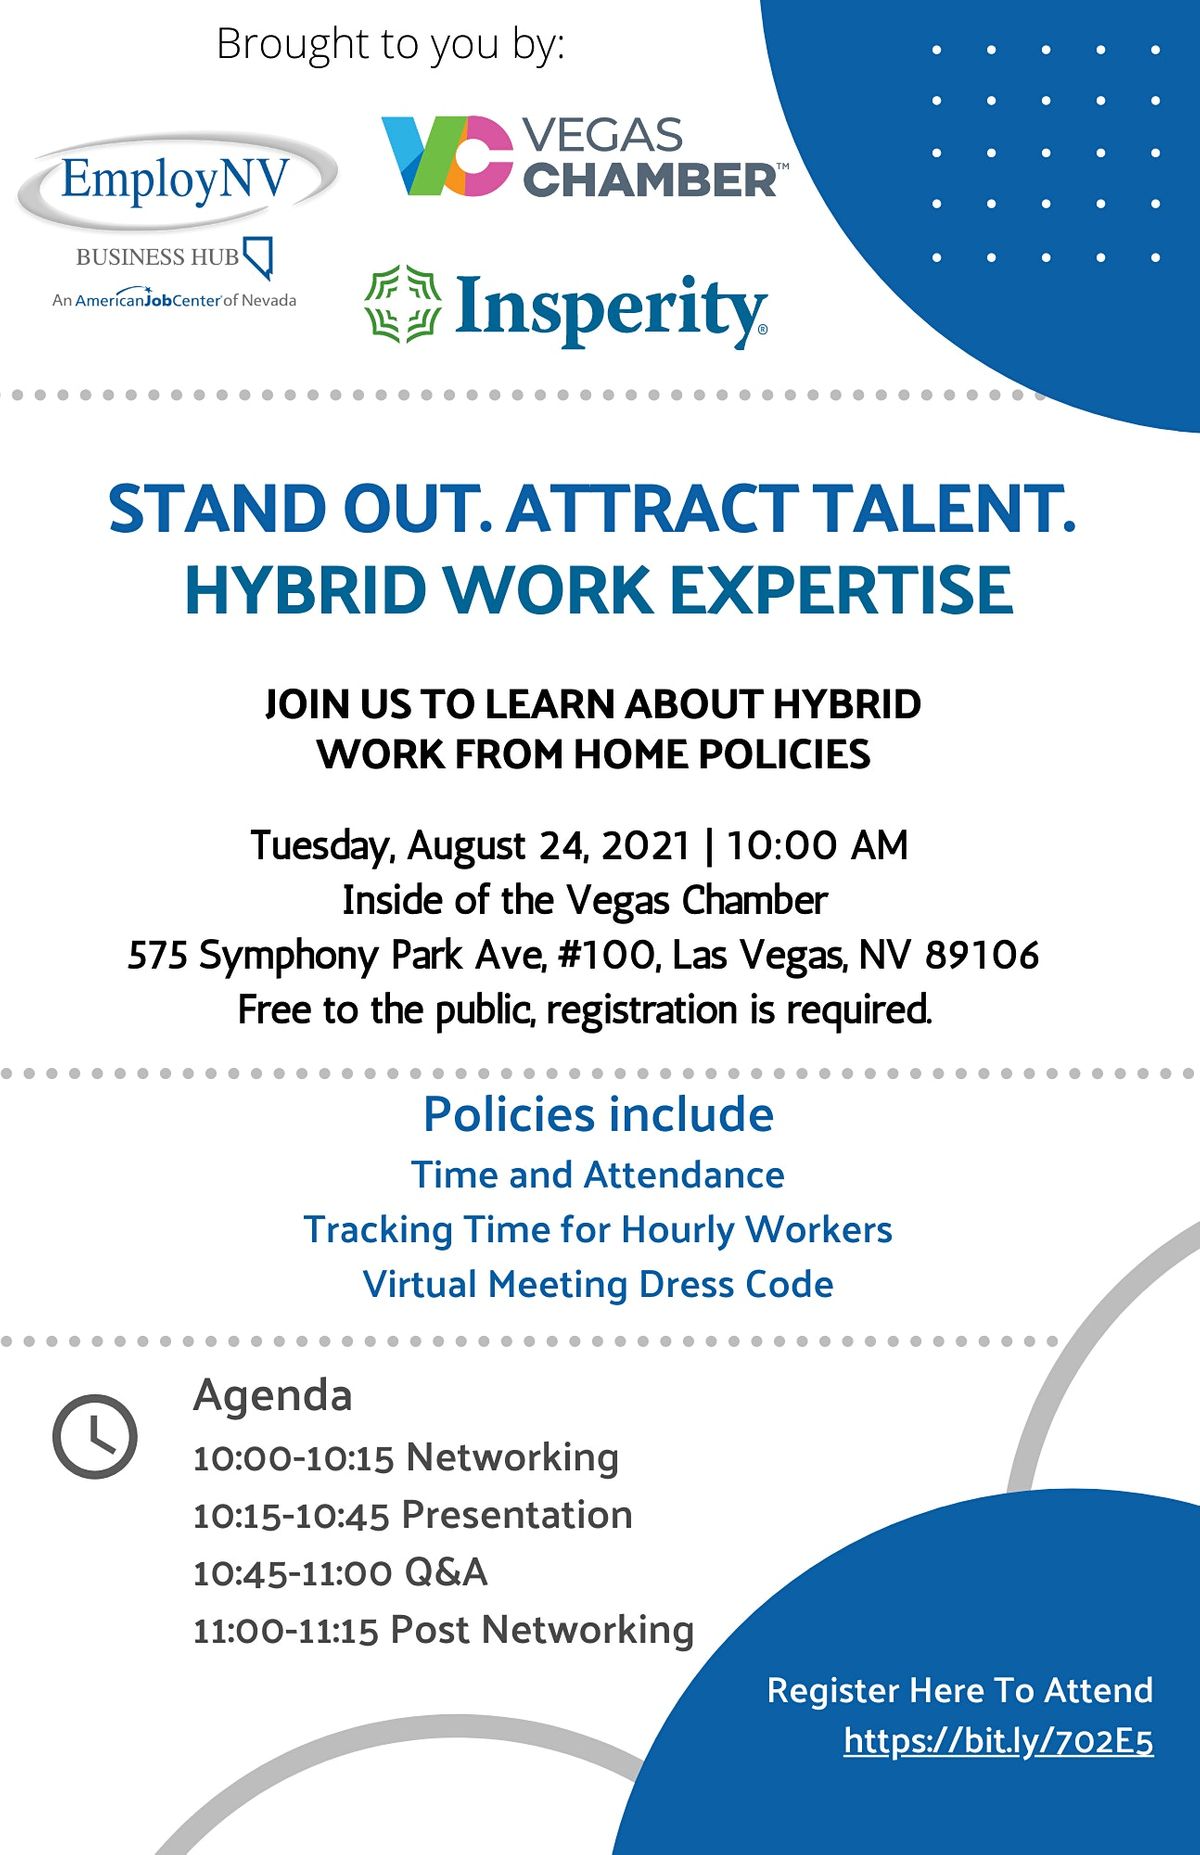 Learn how hybrid work from home policies can make your business stand out